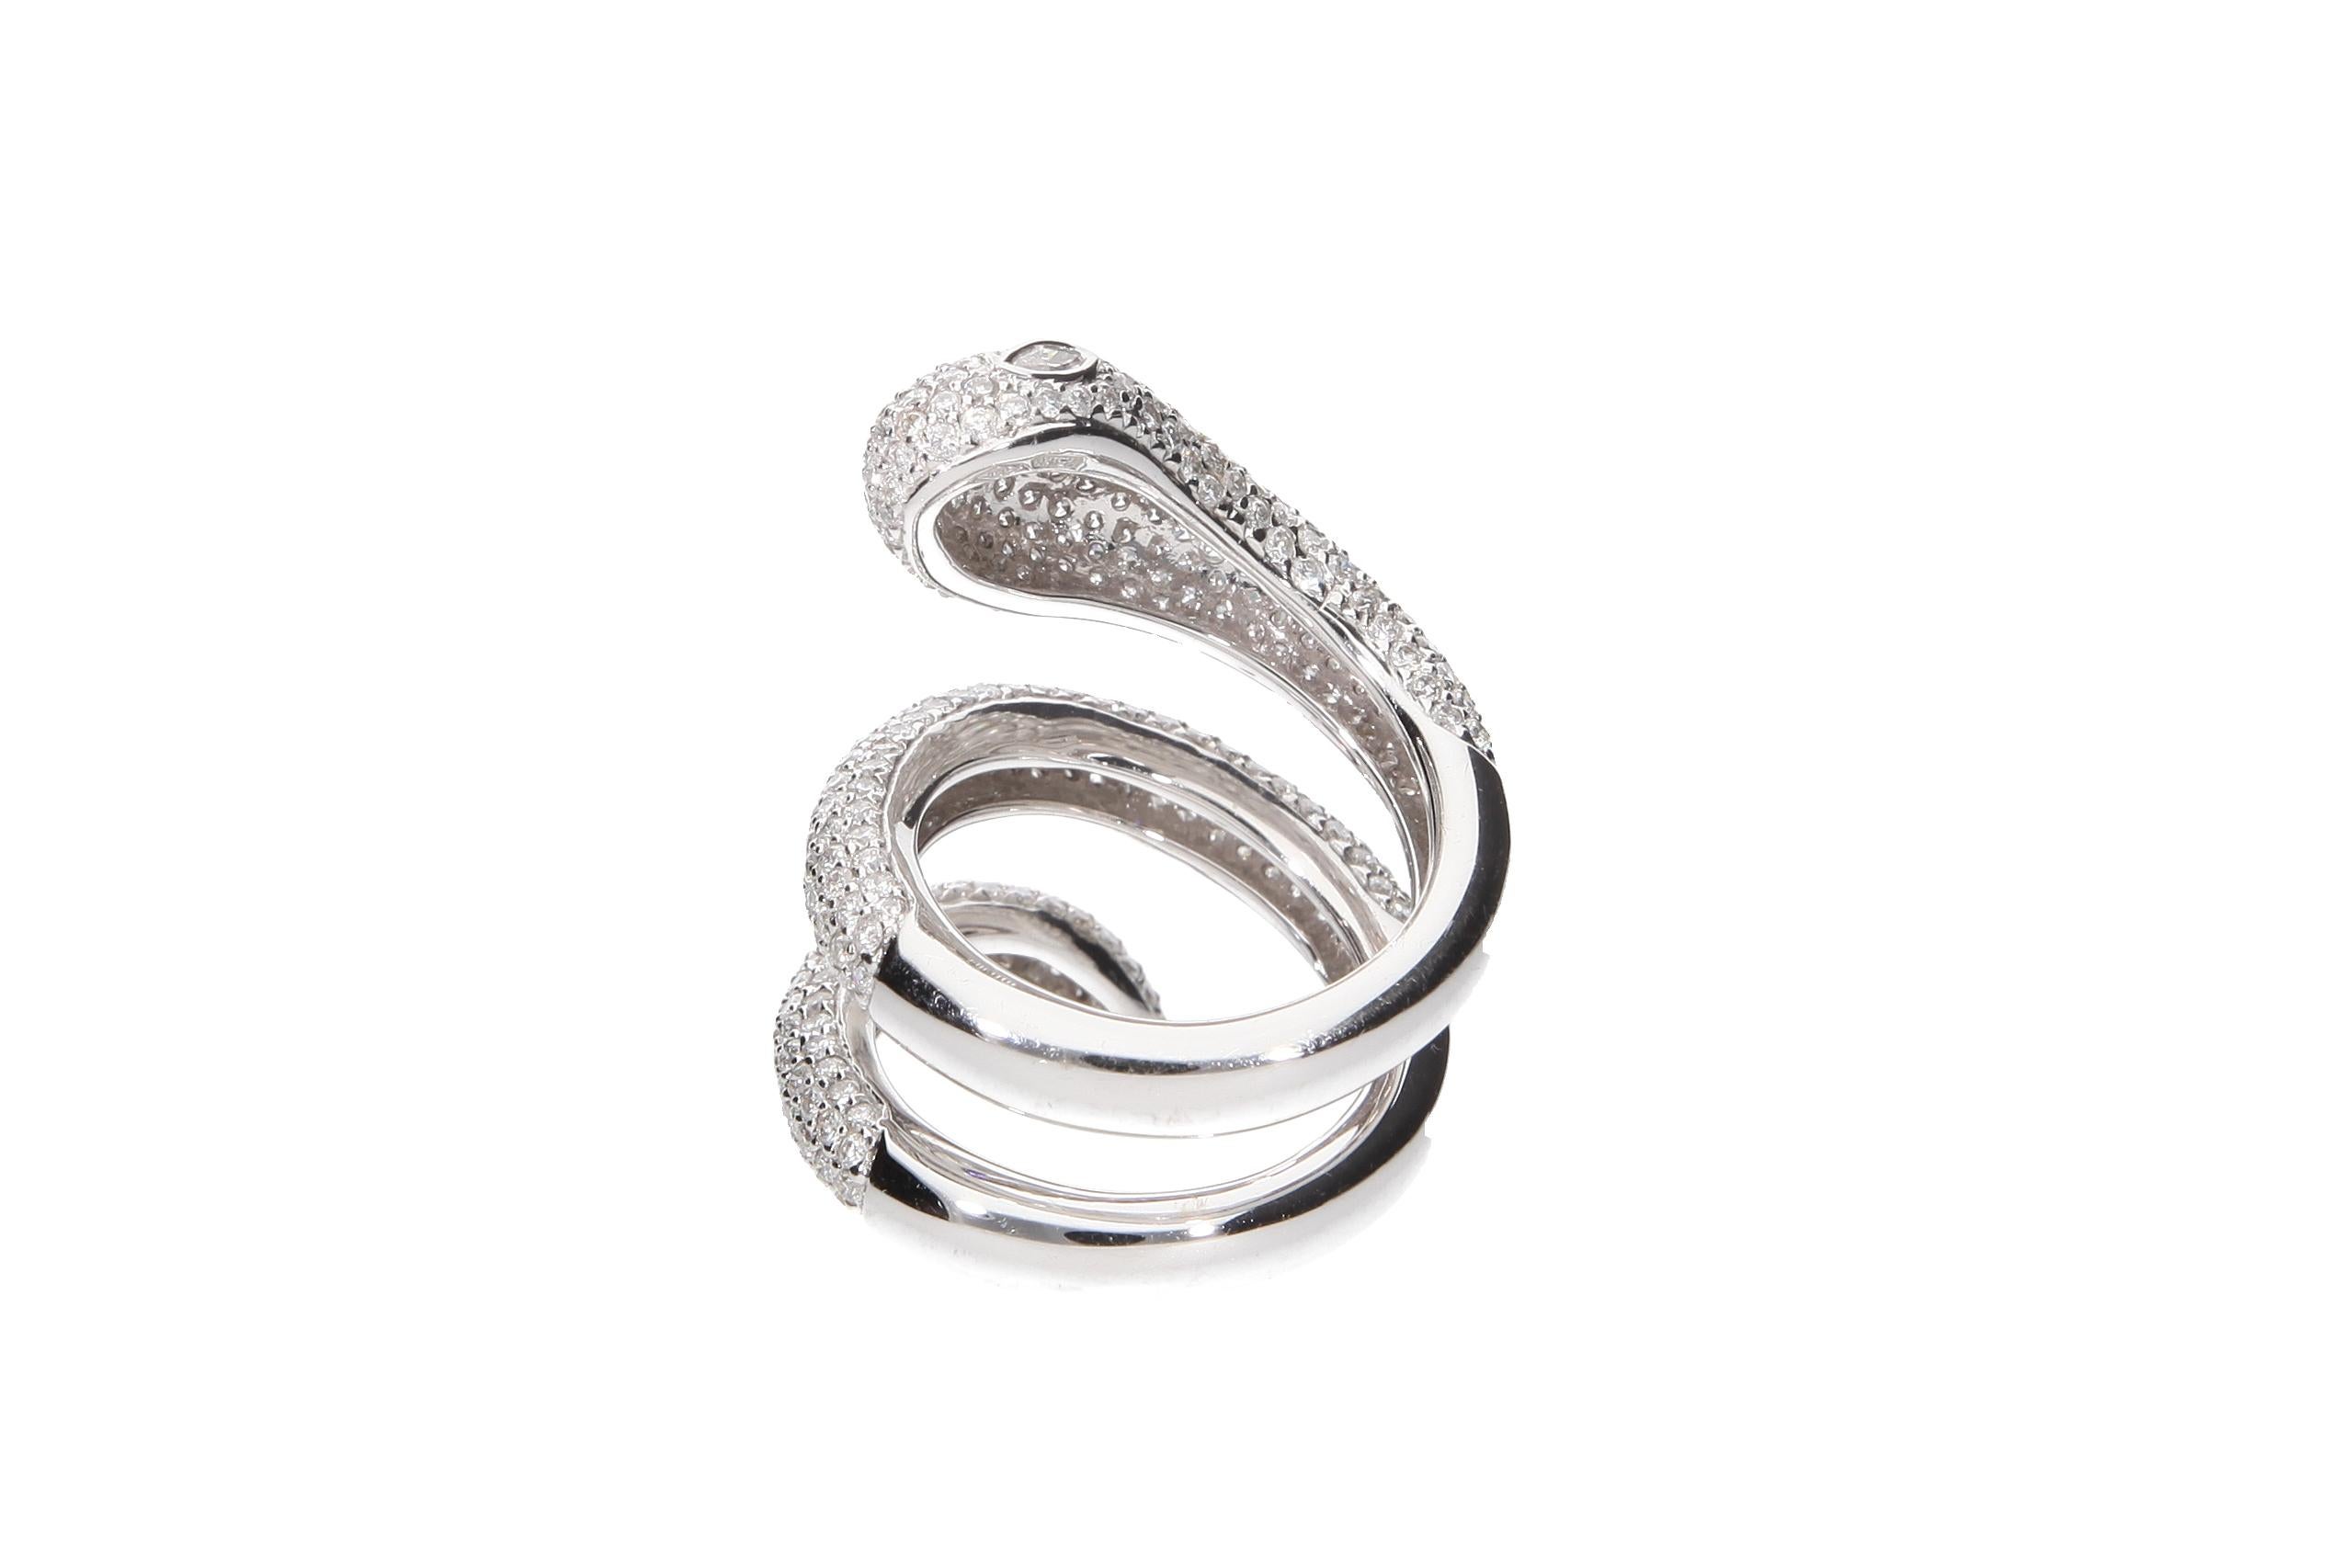 Round Cut Diamonds ct 4.02. Snake Ring. 18 Kt White Gold. Made in Italy For Sale